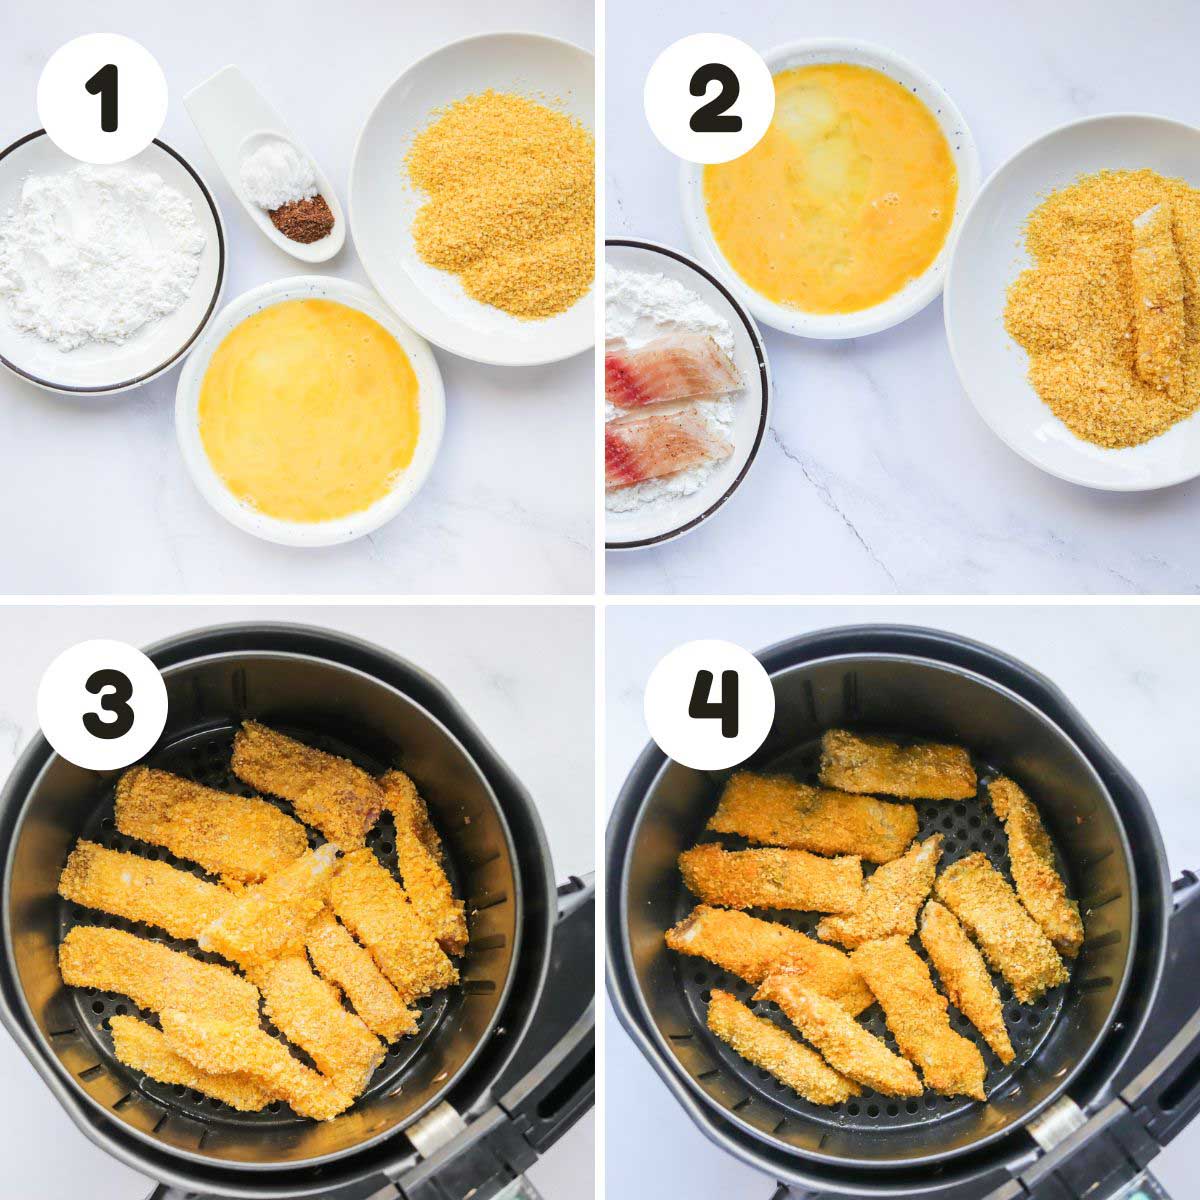 Steps to make the fish.